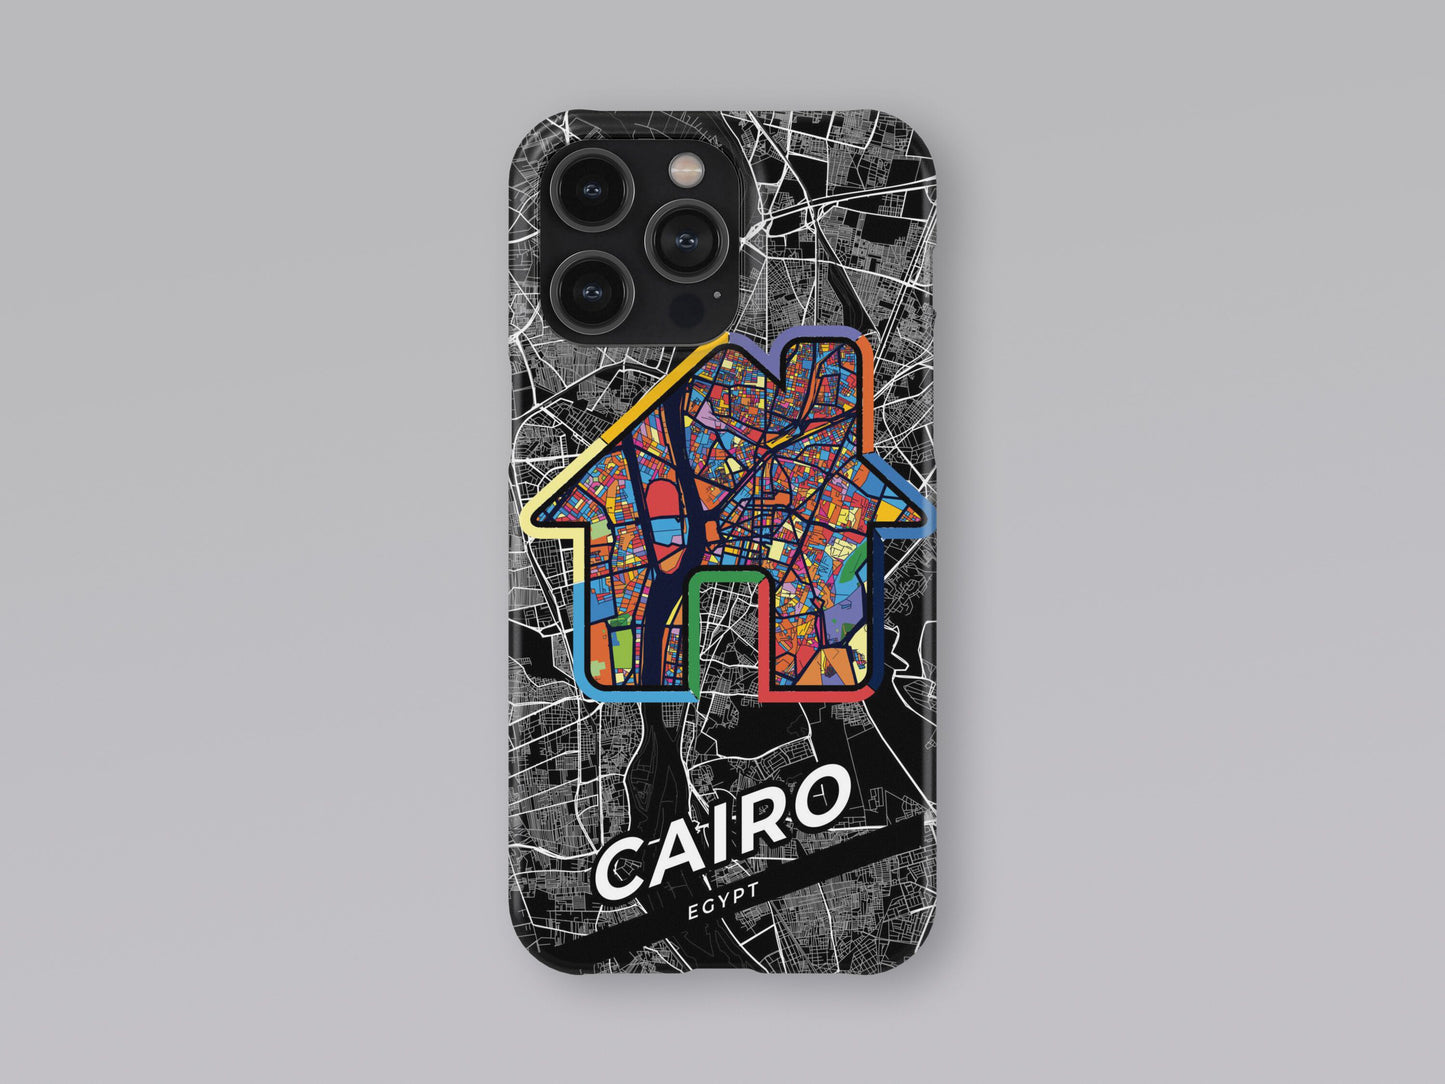 Cairo Egypt slim phone case with colorful icon. Birthday, wedding or housewarming gift. Couple match cases. 3